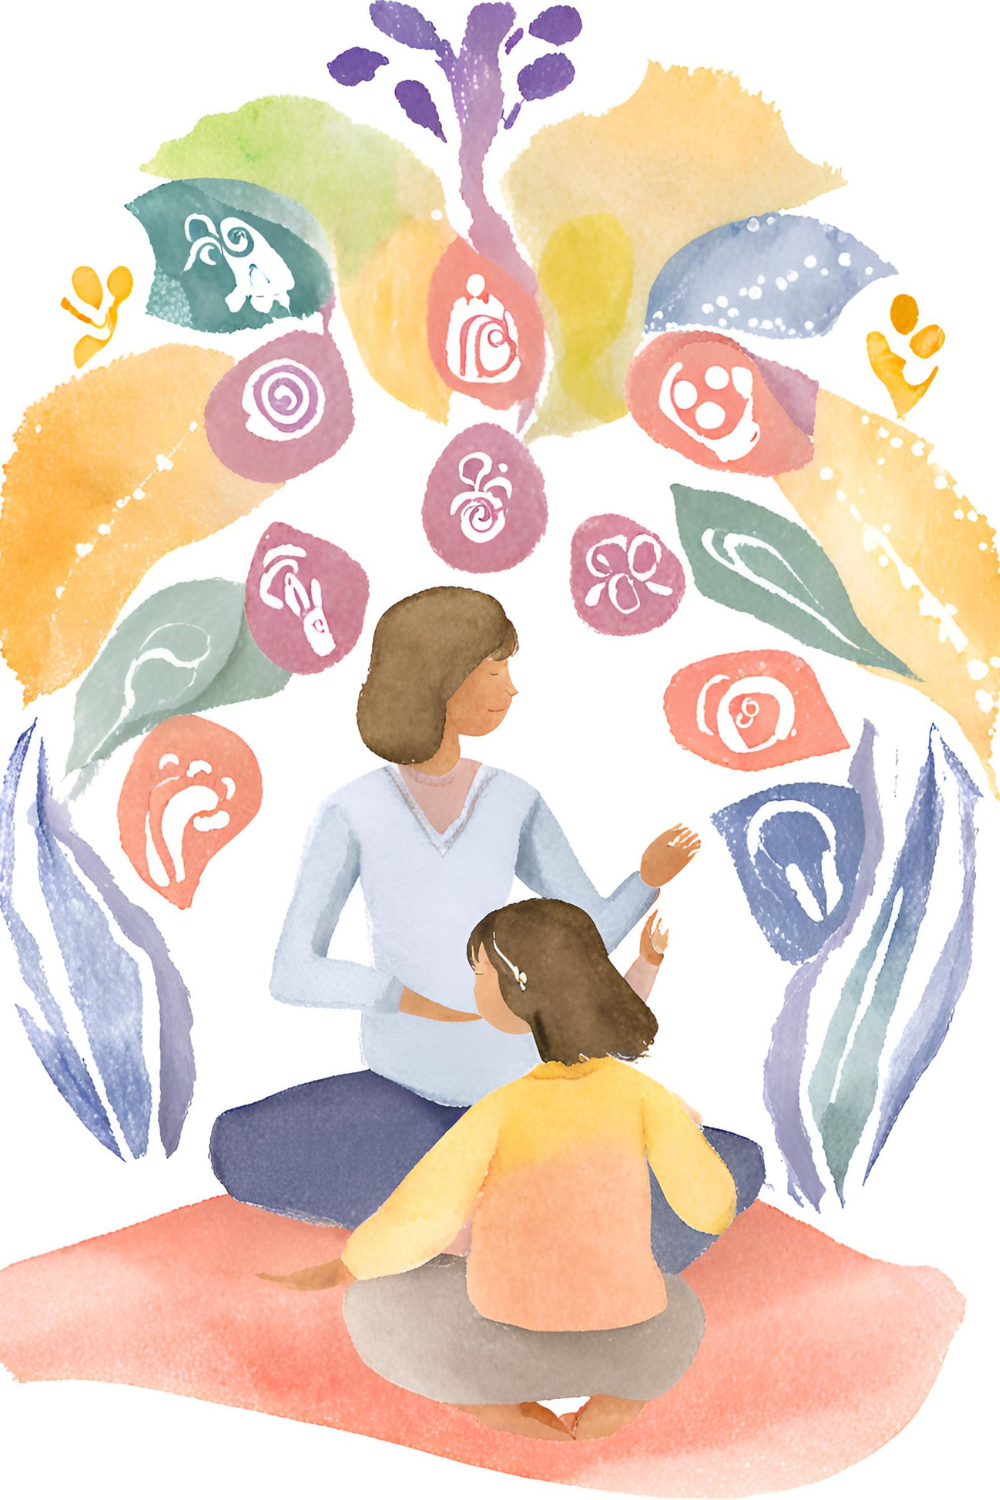 Balancing Work and Family Life with Reiki Practices